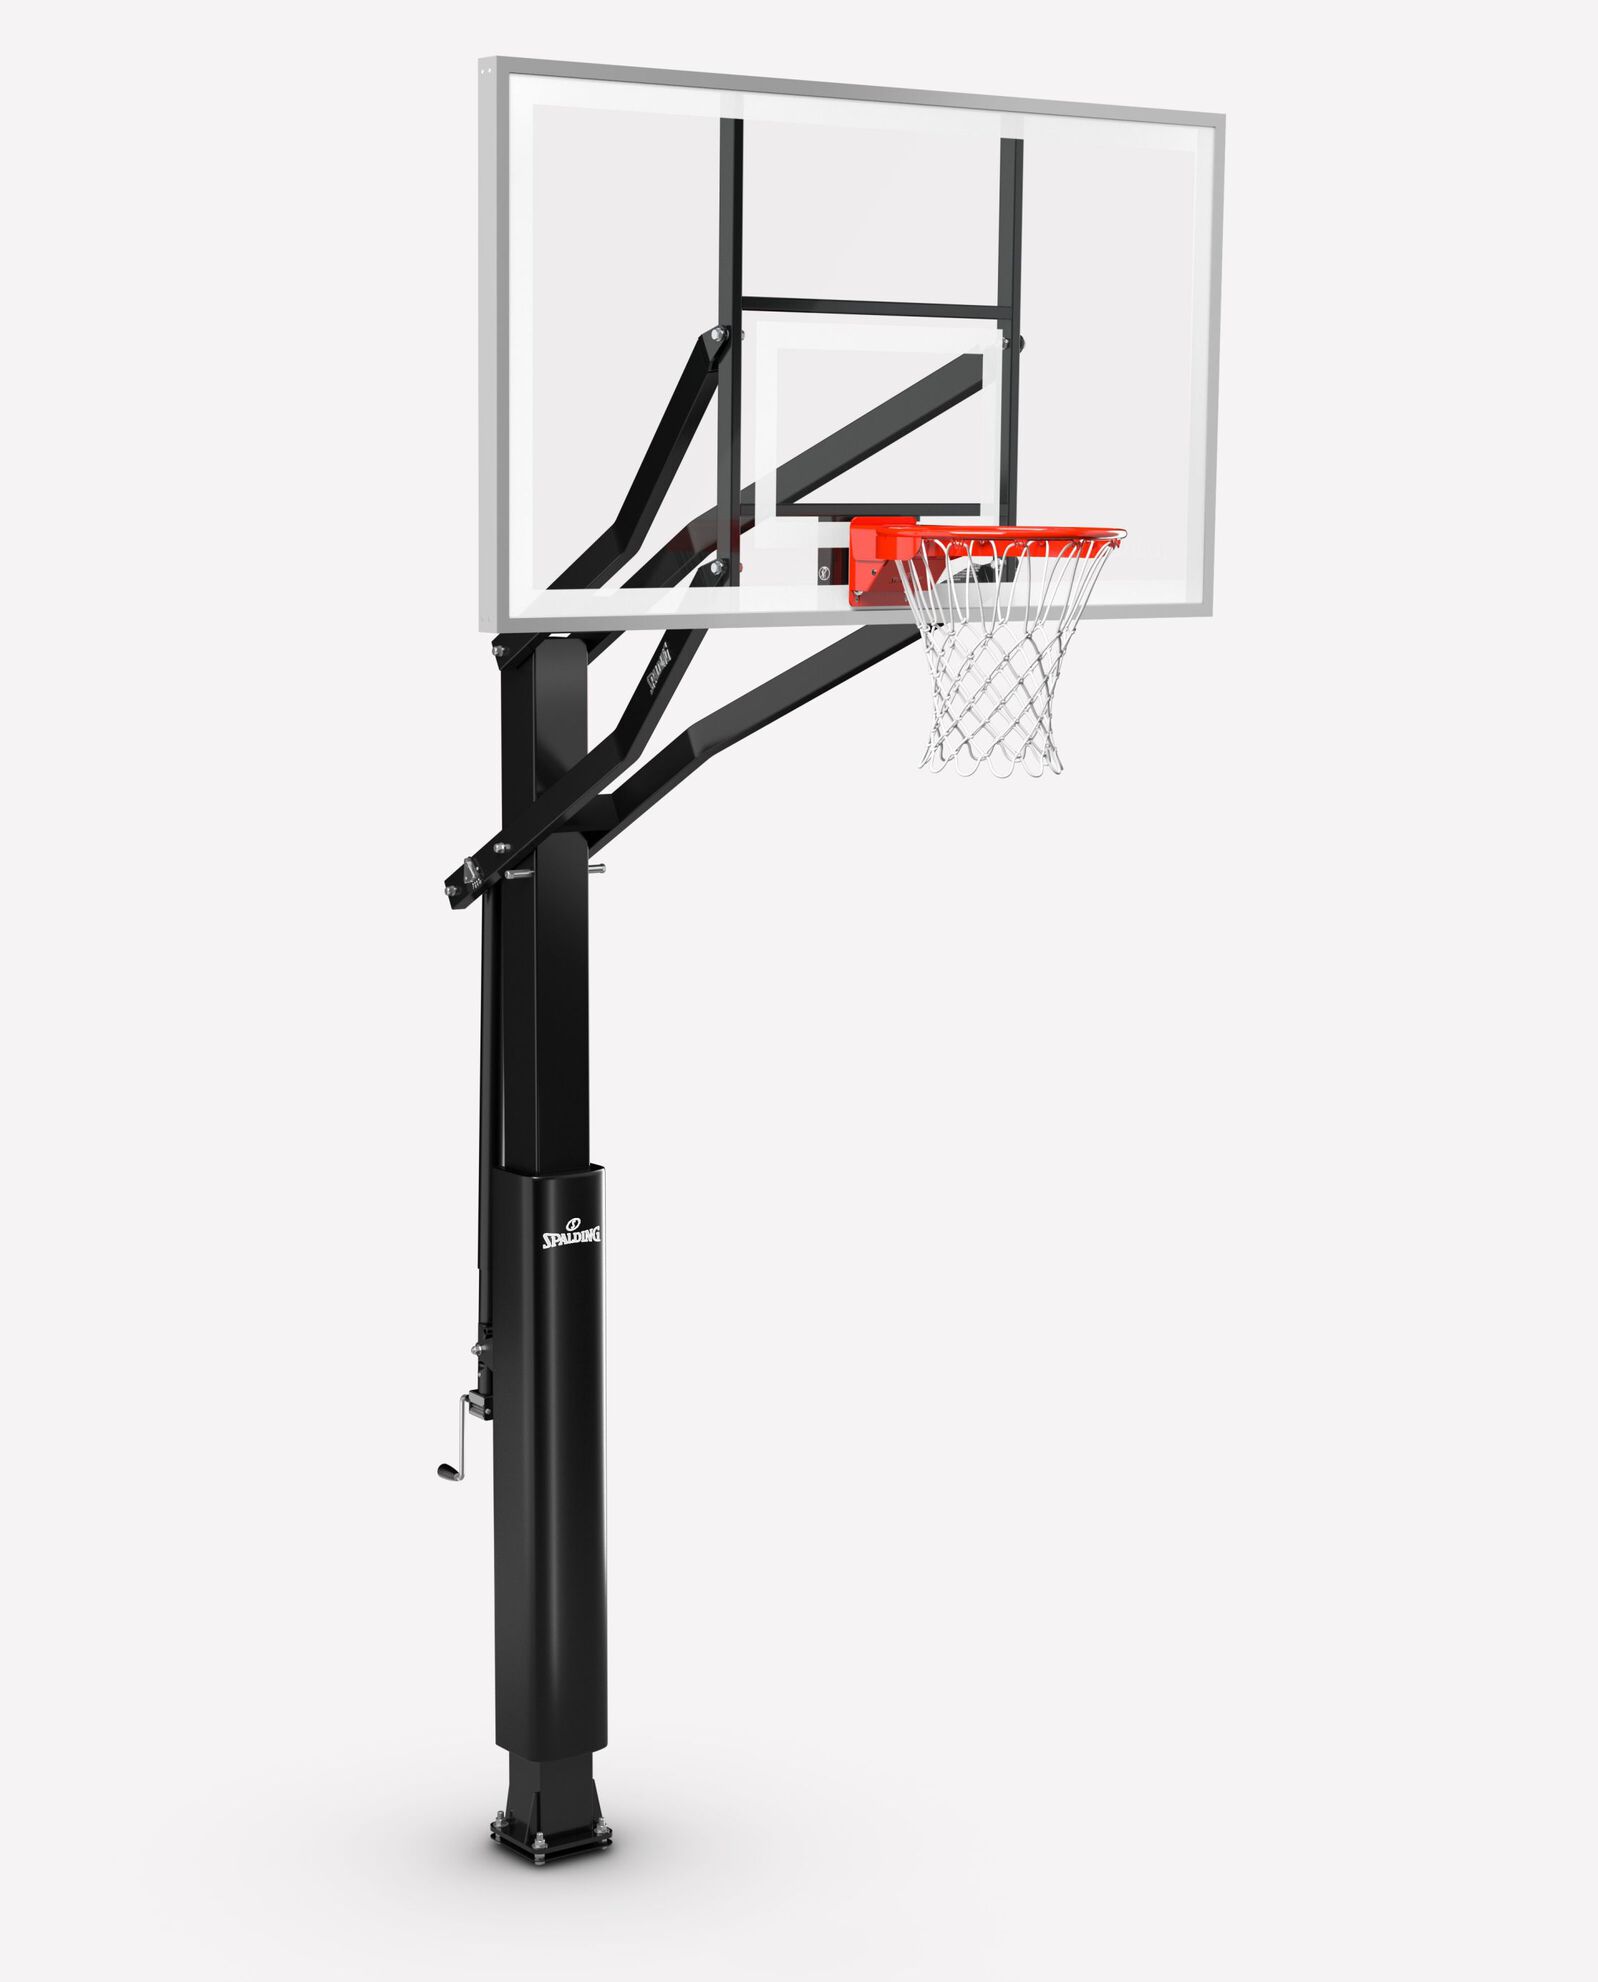 Buying a Basketball Hoop: What to Look for